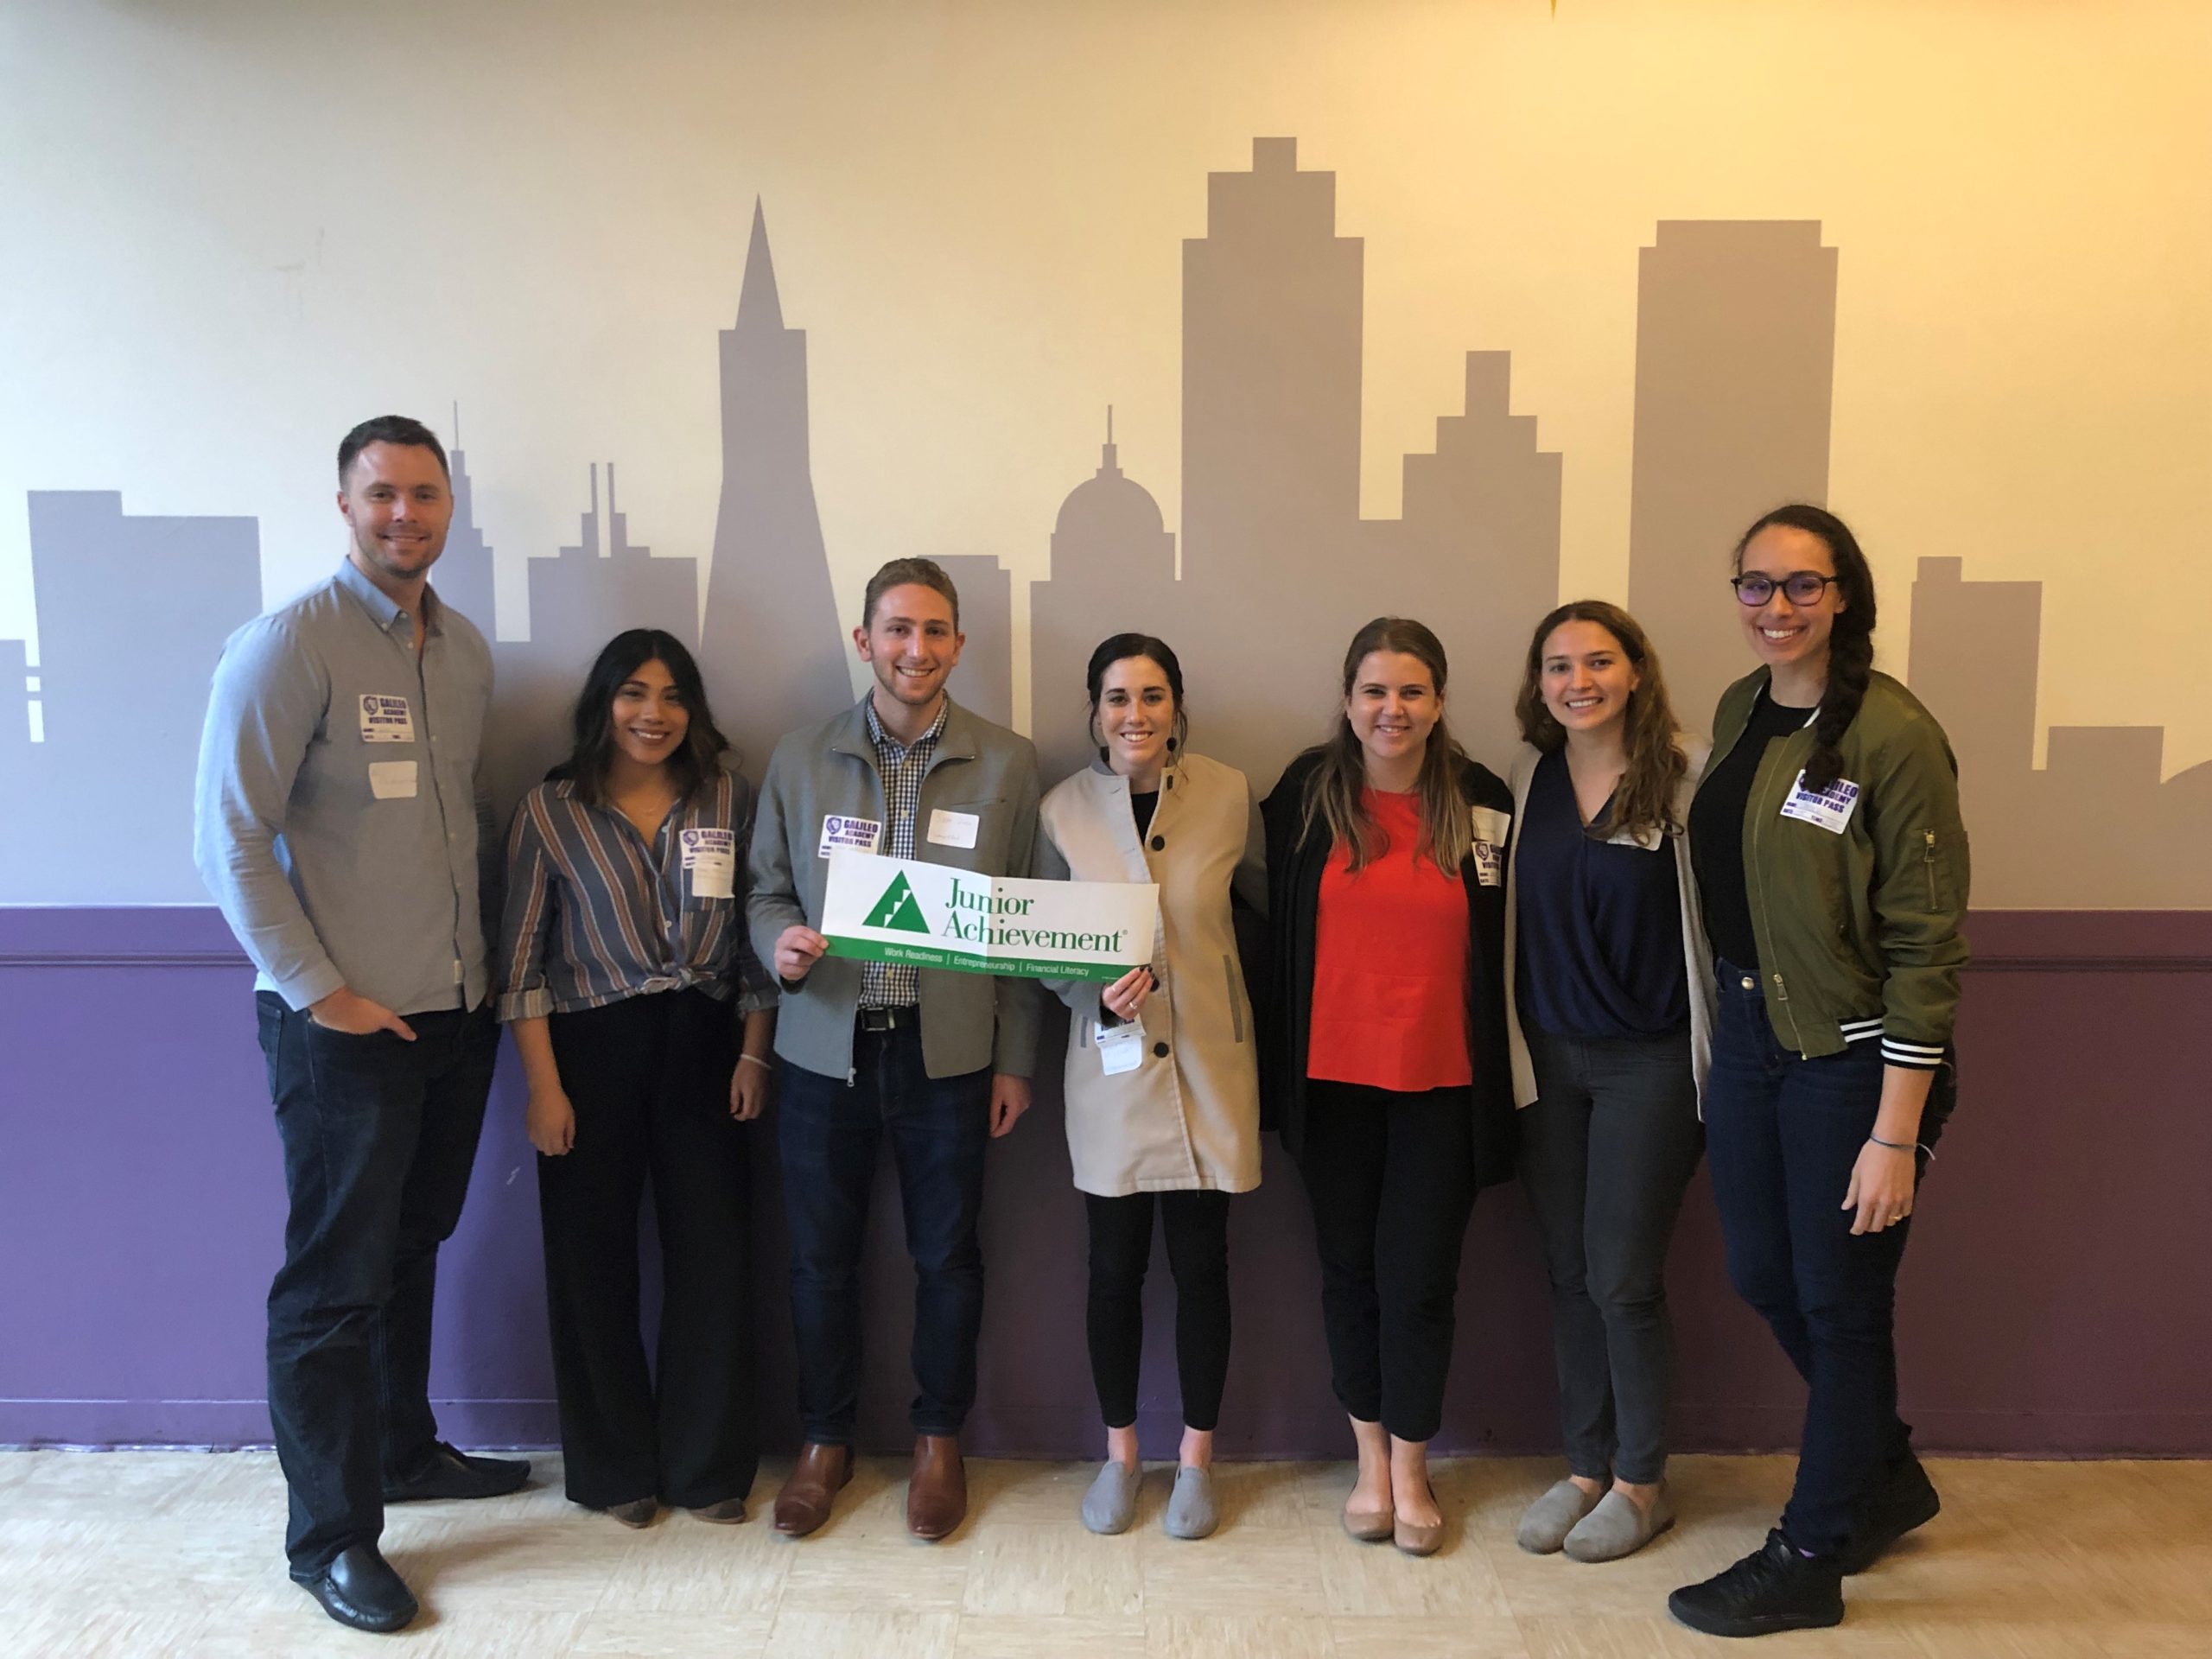 FleishmanHillard's San Francisco office partnered with Junior Achievement in Northern California for FH4Inclusion.